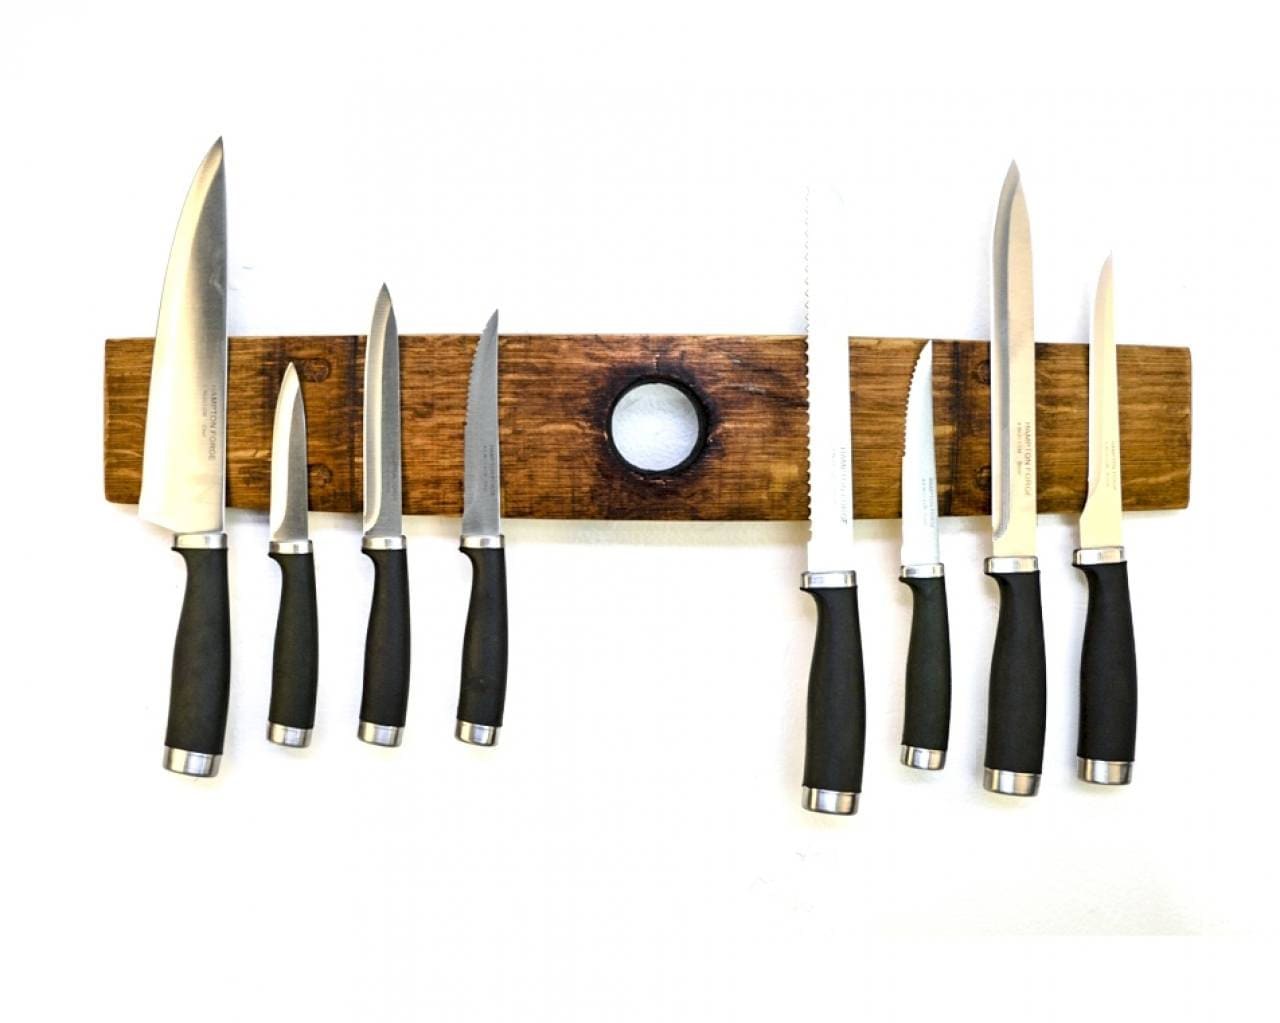 Barrel Stave Chef's Knife - Made From Bourbon Barrels